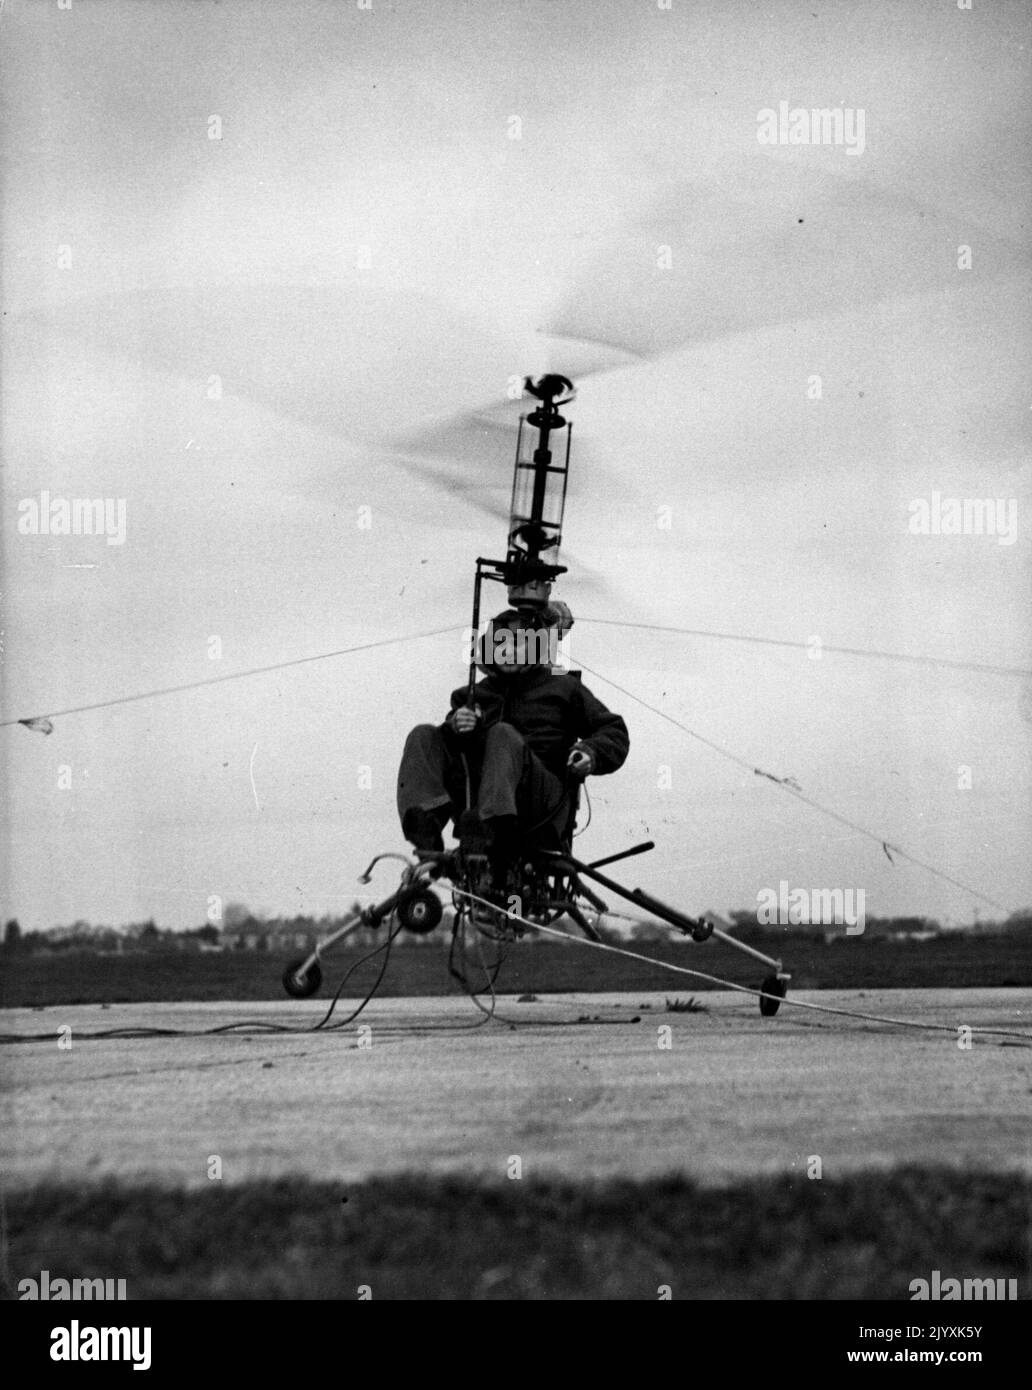 Flying Motor-Cycle Tames The Air -- The 'Hoppicopter' motor-cycle of the air, took the air - in a very small dose - in its first engine tests at Somerford Aerodrome, Christchurch, Hampshire. The 'Hoppicopter' based on the machine designed by the American, H.T. Pentecost, was airborne for only a few minutes, for it was tethered by steel cables. Mr. Berry Martin, managing director of the Winton (Hampshire) factory that built the midget flying machine, piloted it on its first hop. December 12, 1949. Stock Photo